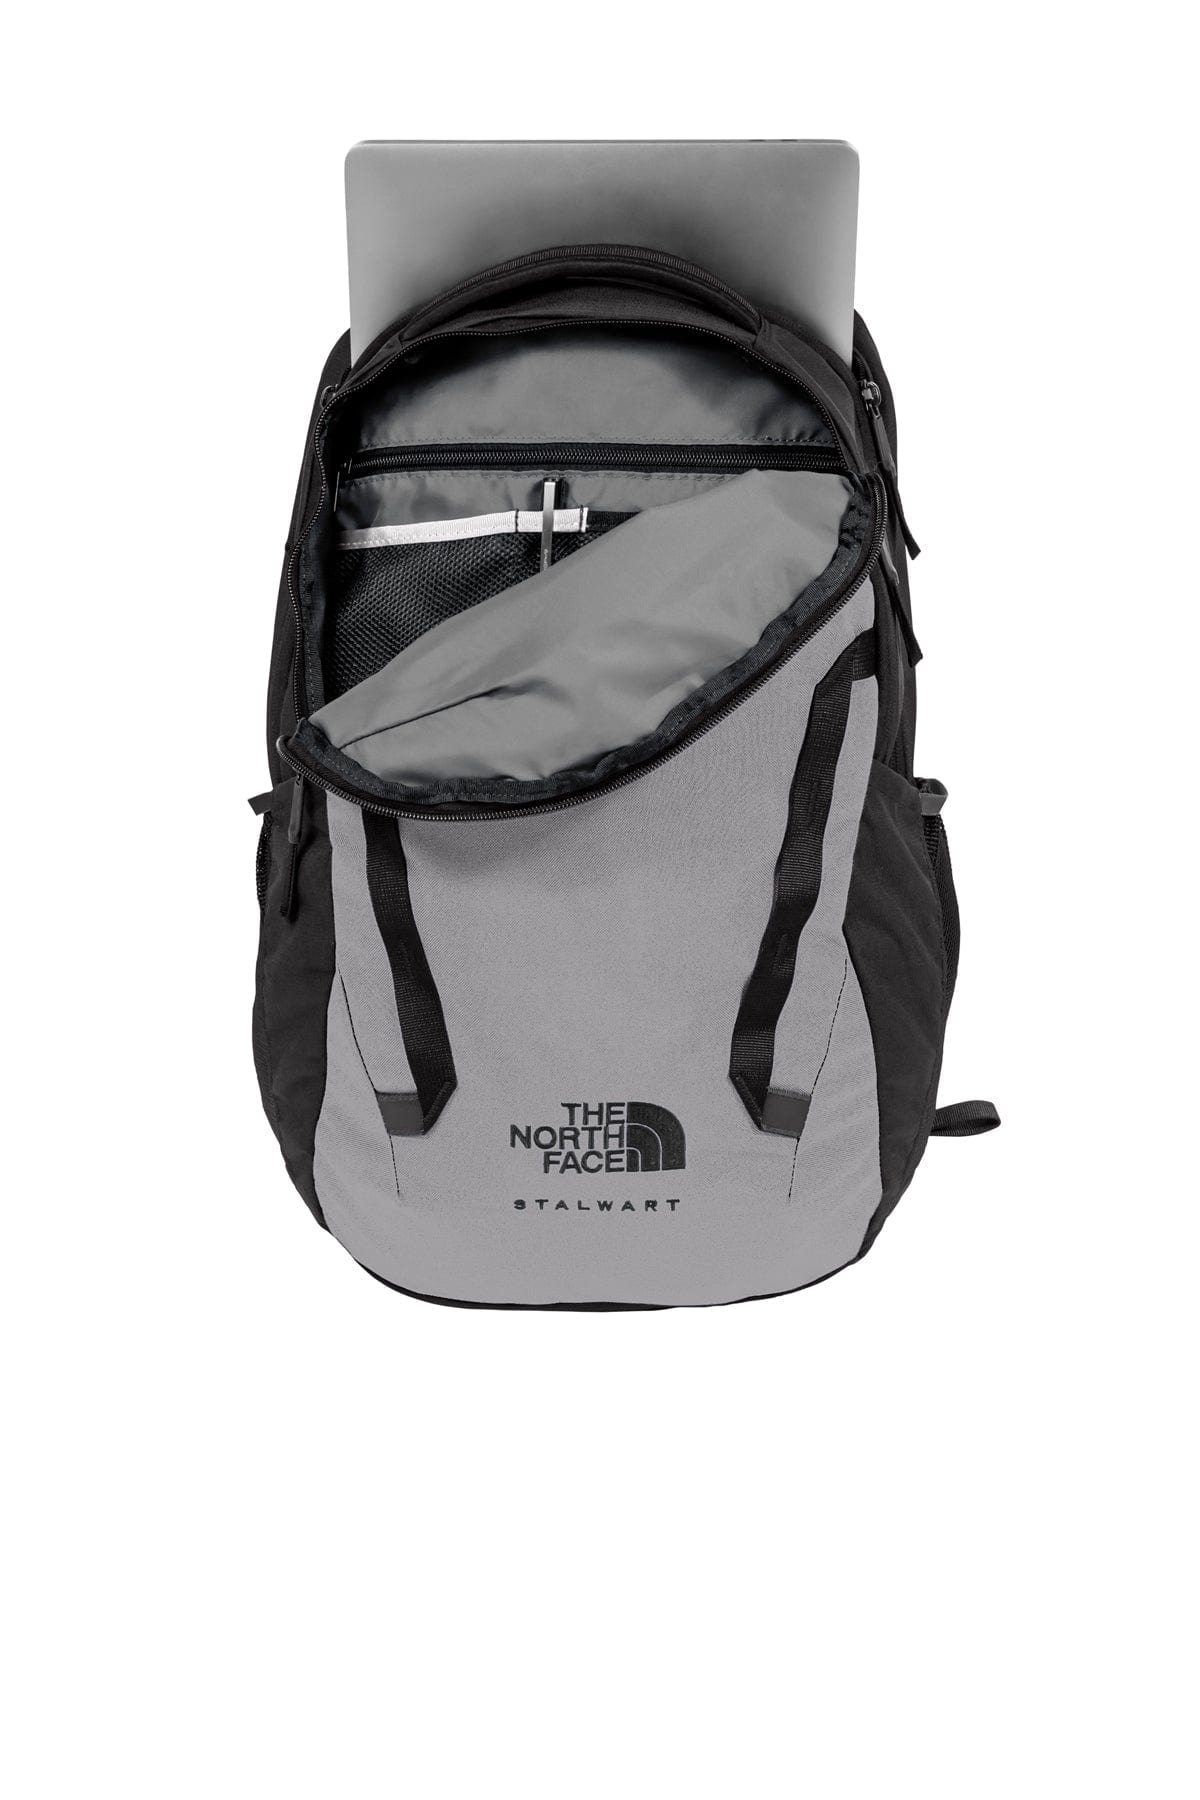 Custom The North Face Stalwart Backpack